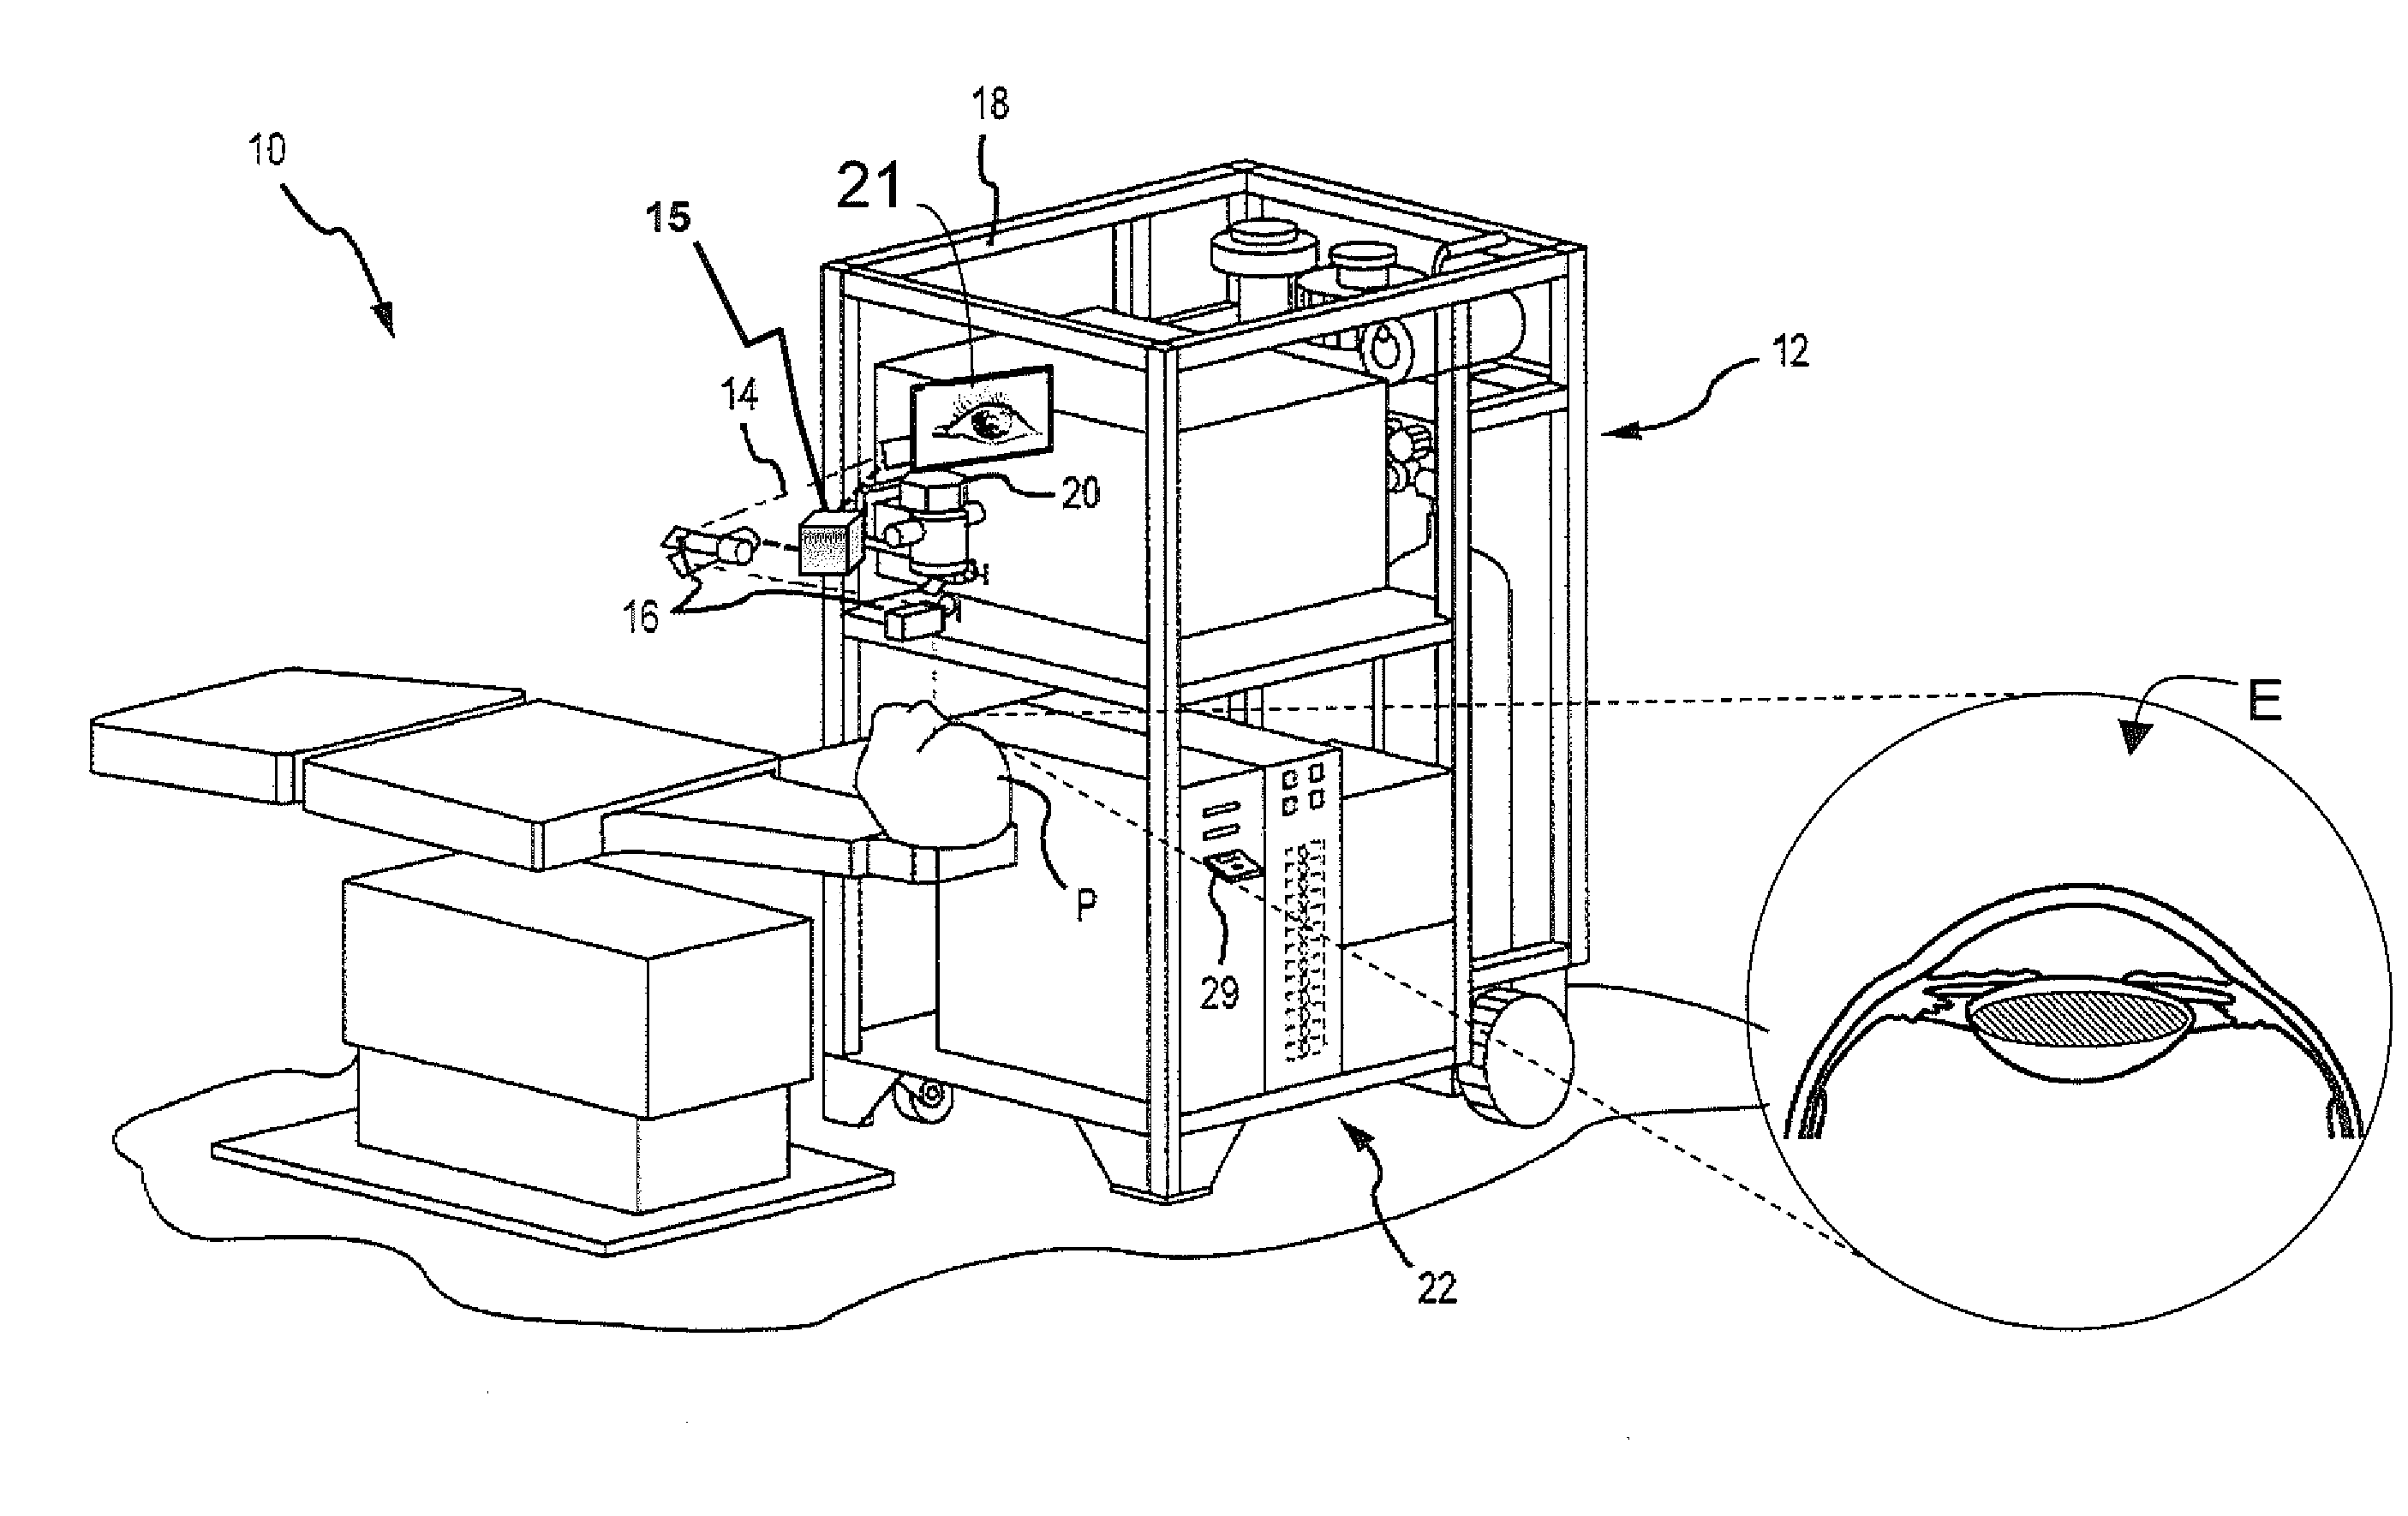 Systems and methods for providing anatomical flap centration for an ophthalmic laser treatment system